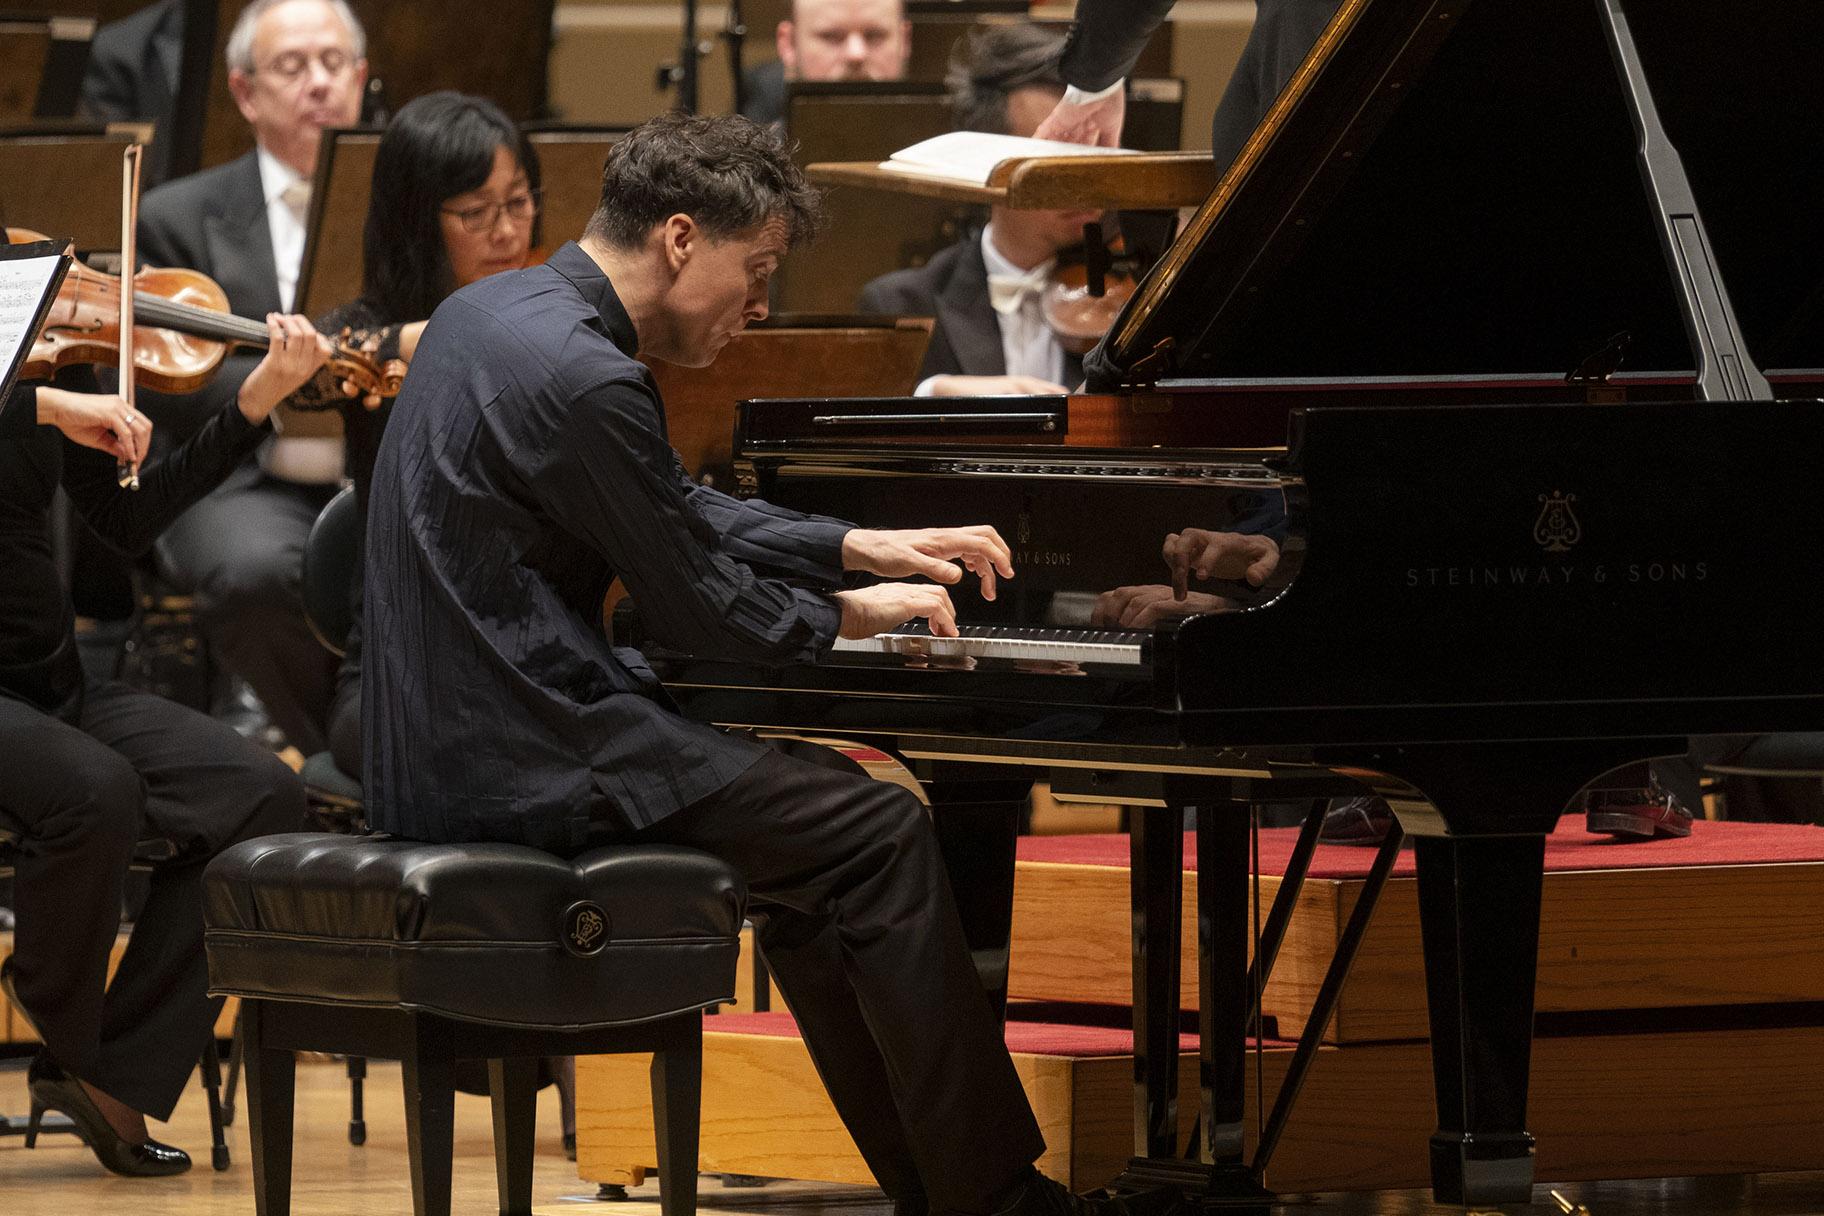 Pianist Paul Lewis performs Beethoven’s Piano Concerto No. 1 with the Chicago Symphony Orchestra on a program that also featured Lewis as soloist in Beethoven’s Piano Concerto No. 4. (Photo credit: Todd Rosenberg)